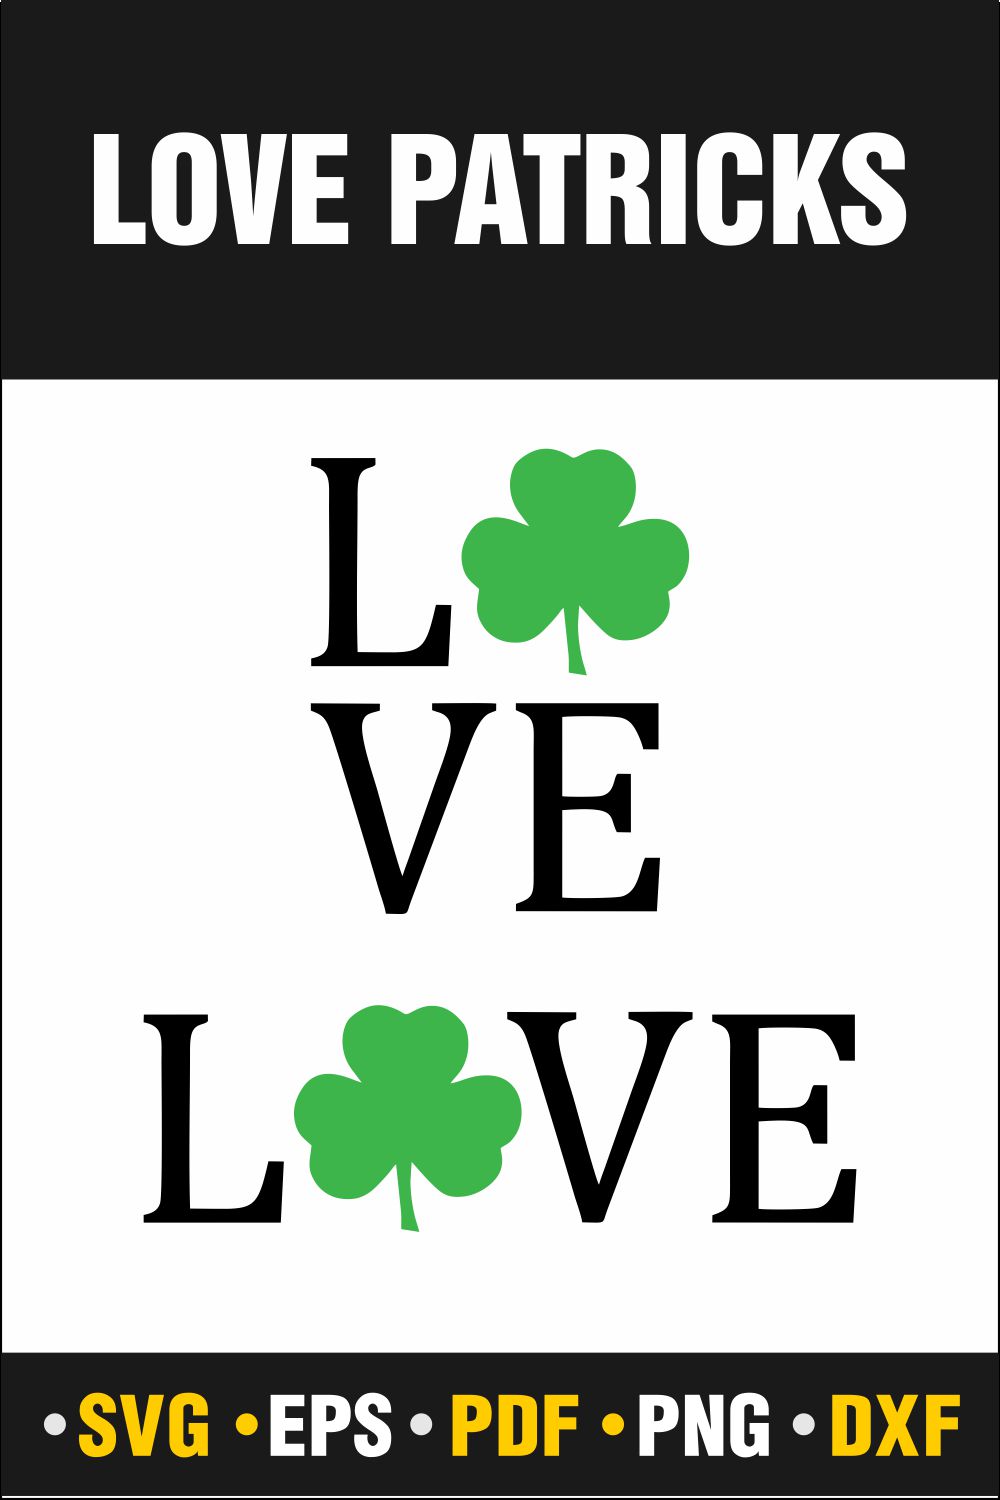 St Patrick's day Svg, St Patrick's Love , St Patrick's day Love Svg, St Patrick's day Png, St Patrick's Png, Love Svg, Instant Download Vector Cut file Cricut, Silhouette, Pdf Png, Dxf, Decal pinterest preview image.